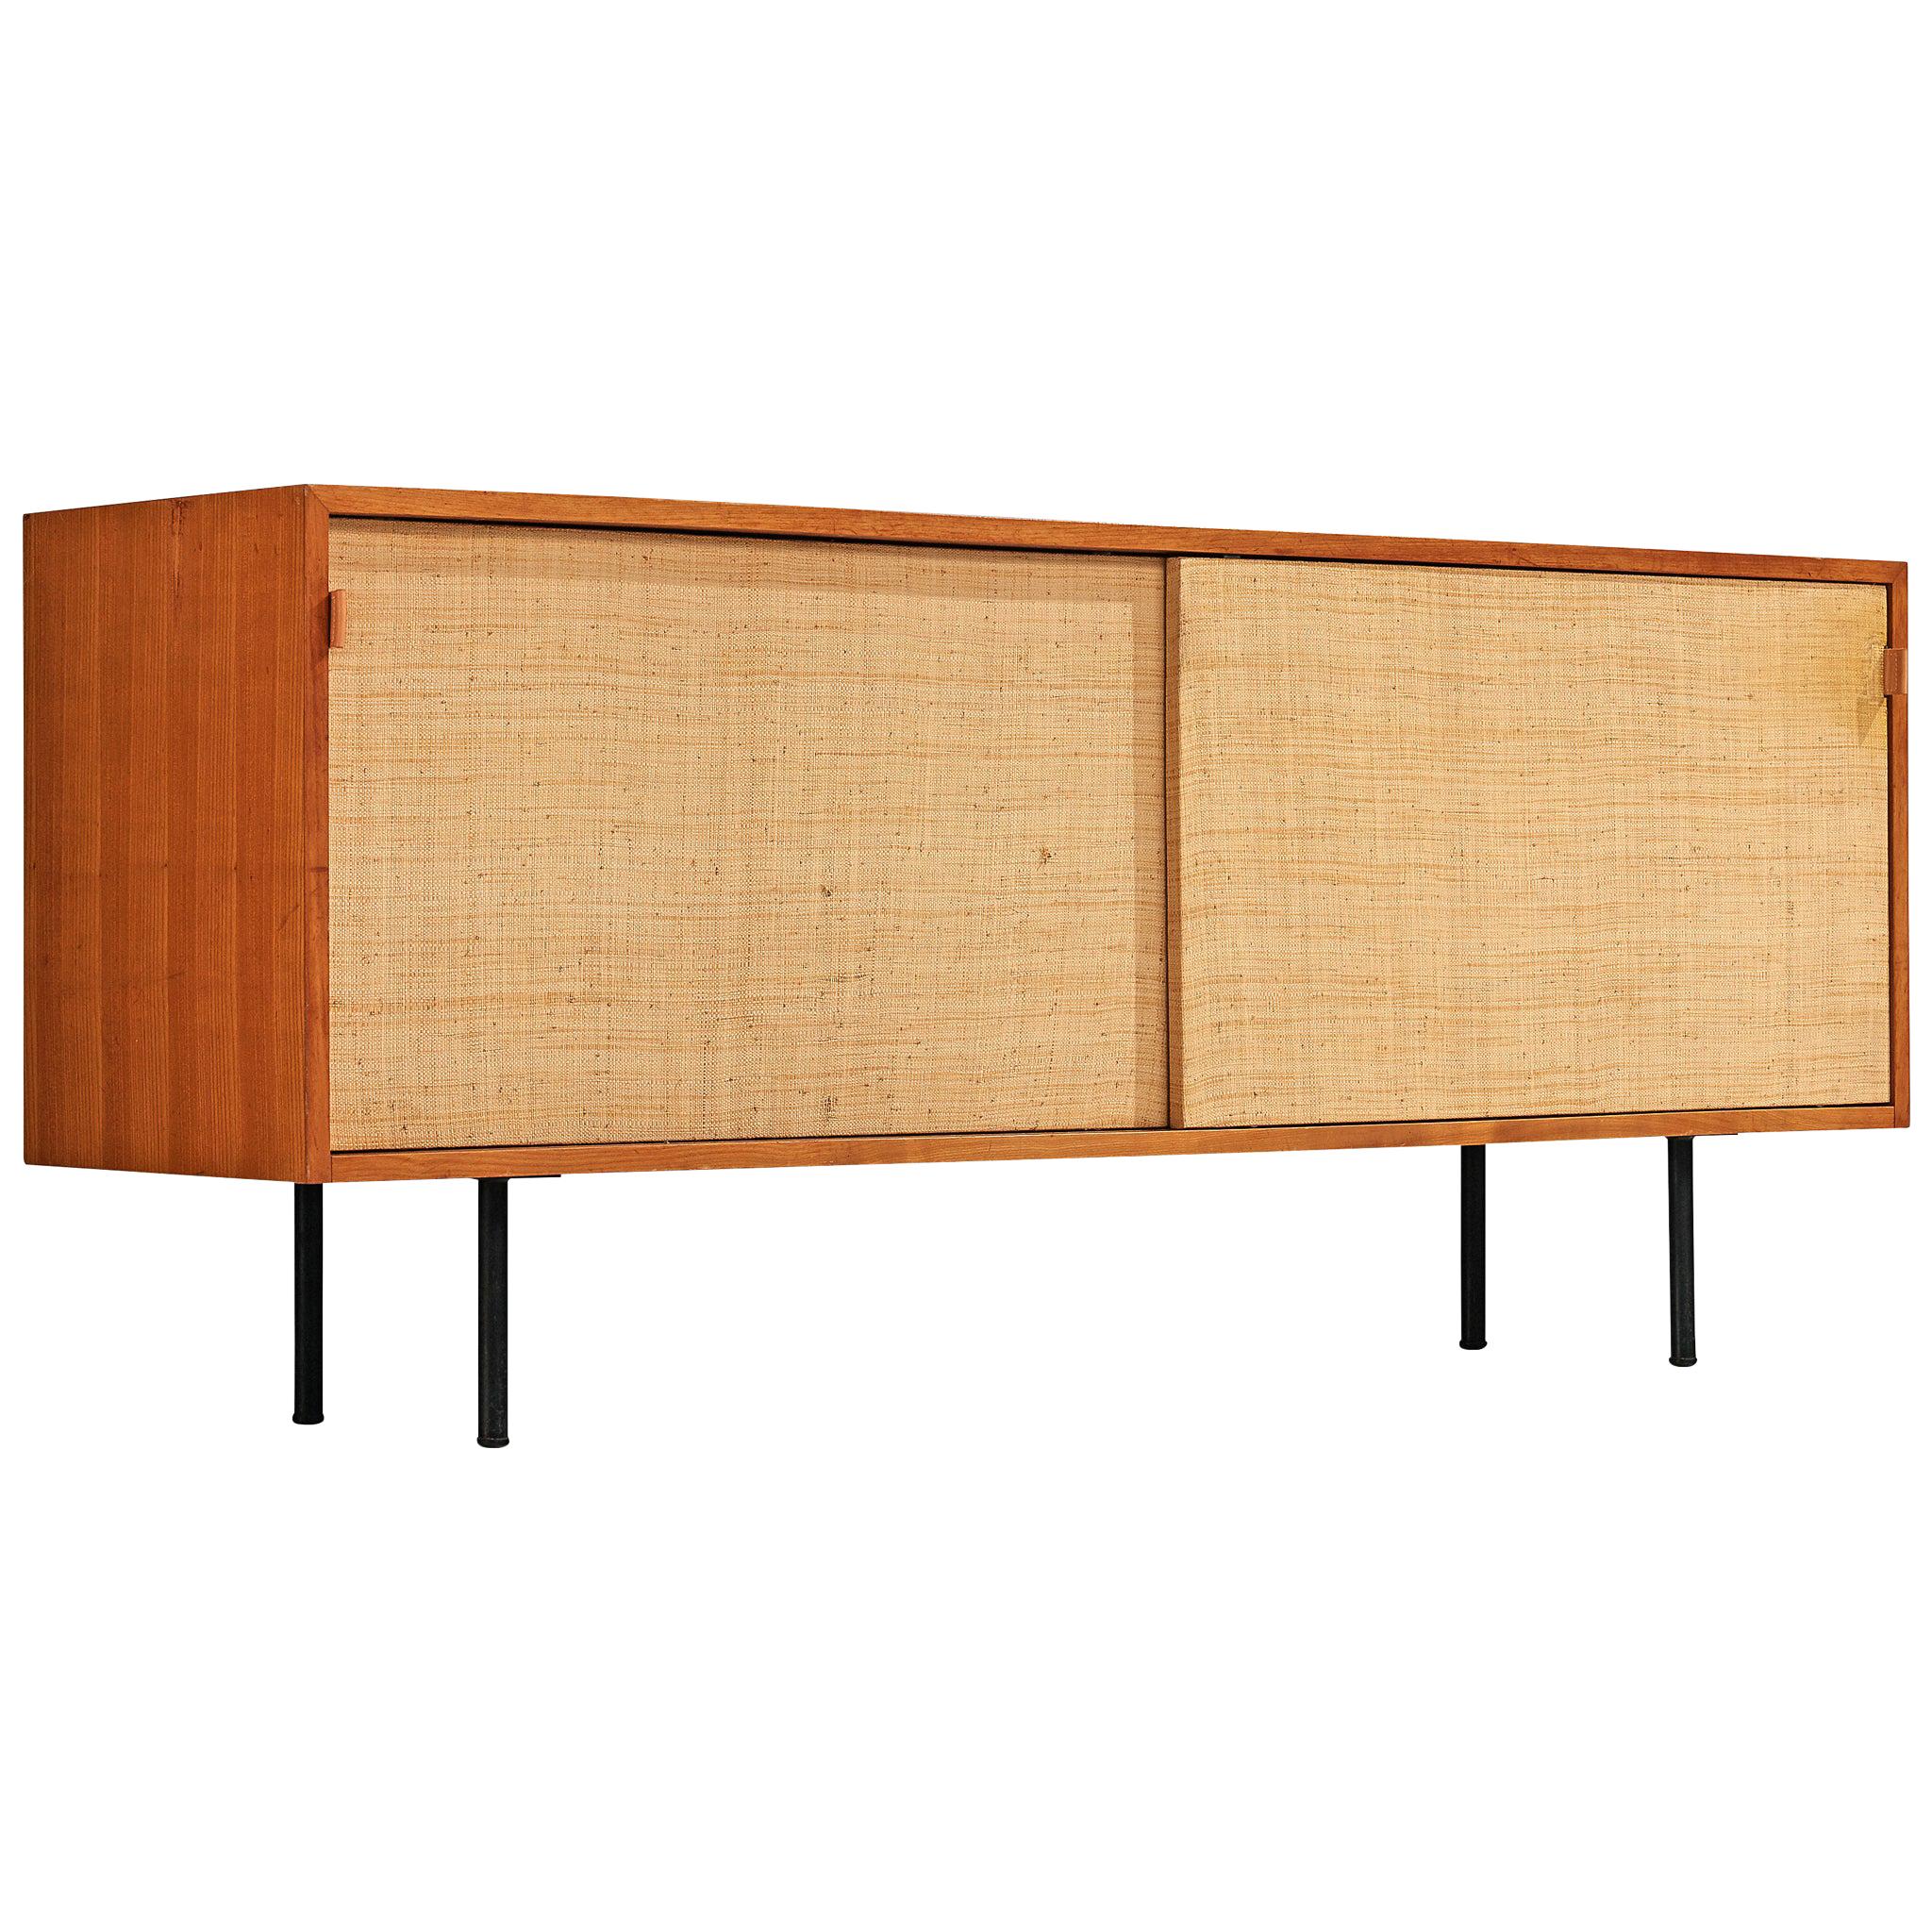 Early Florence Knoll Walnut Credenza with Cane Sliding Door